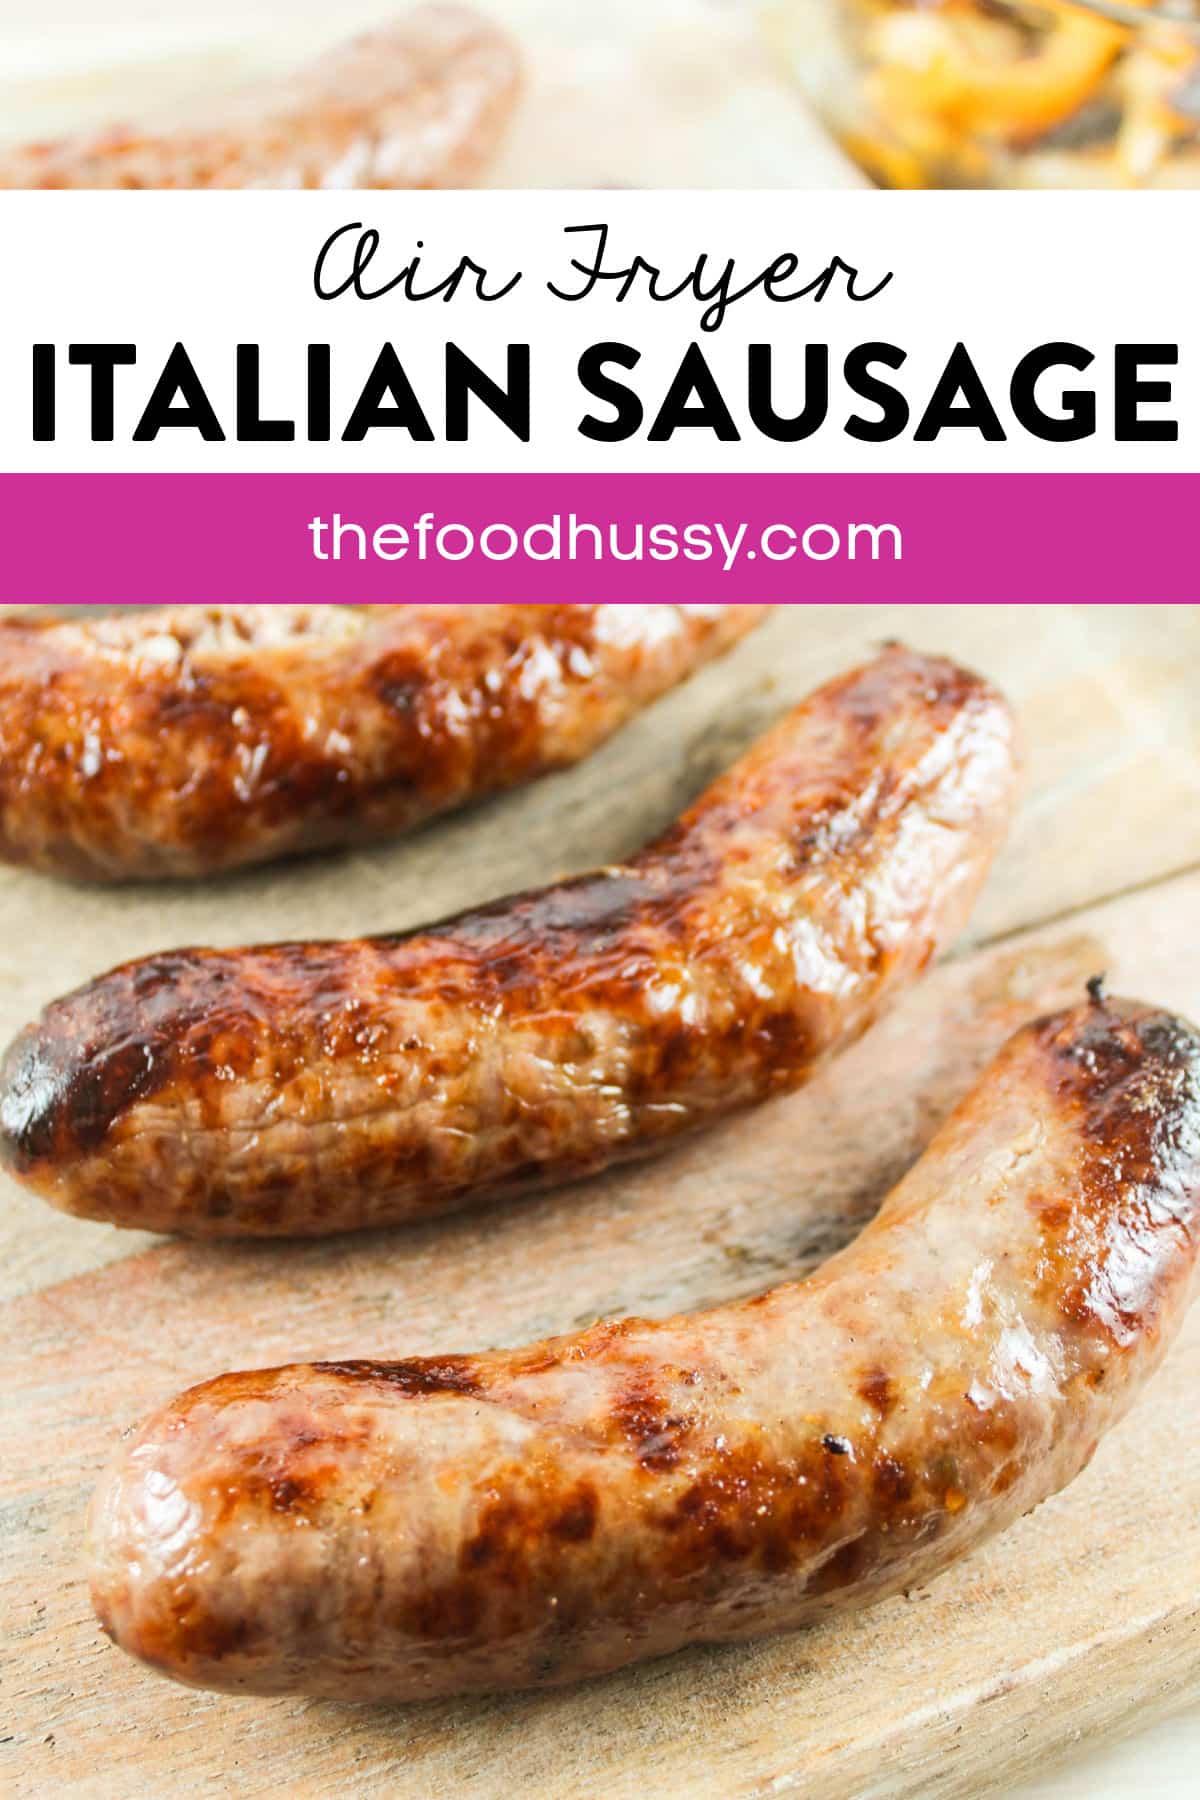 Air Fryer Italian Sausage is a quick and easy dinner that makes perfect sausages every time! Whether you're eating them on a bun, over pasta or in a stir fry - these air fryer sausages will make a delicious dinner! via @foodhussy